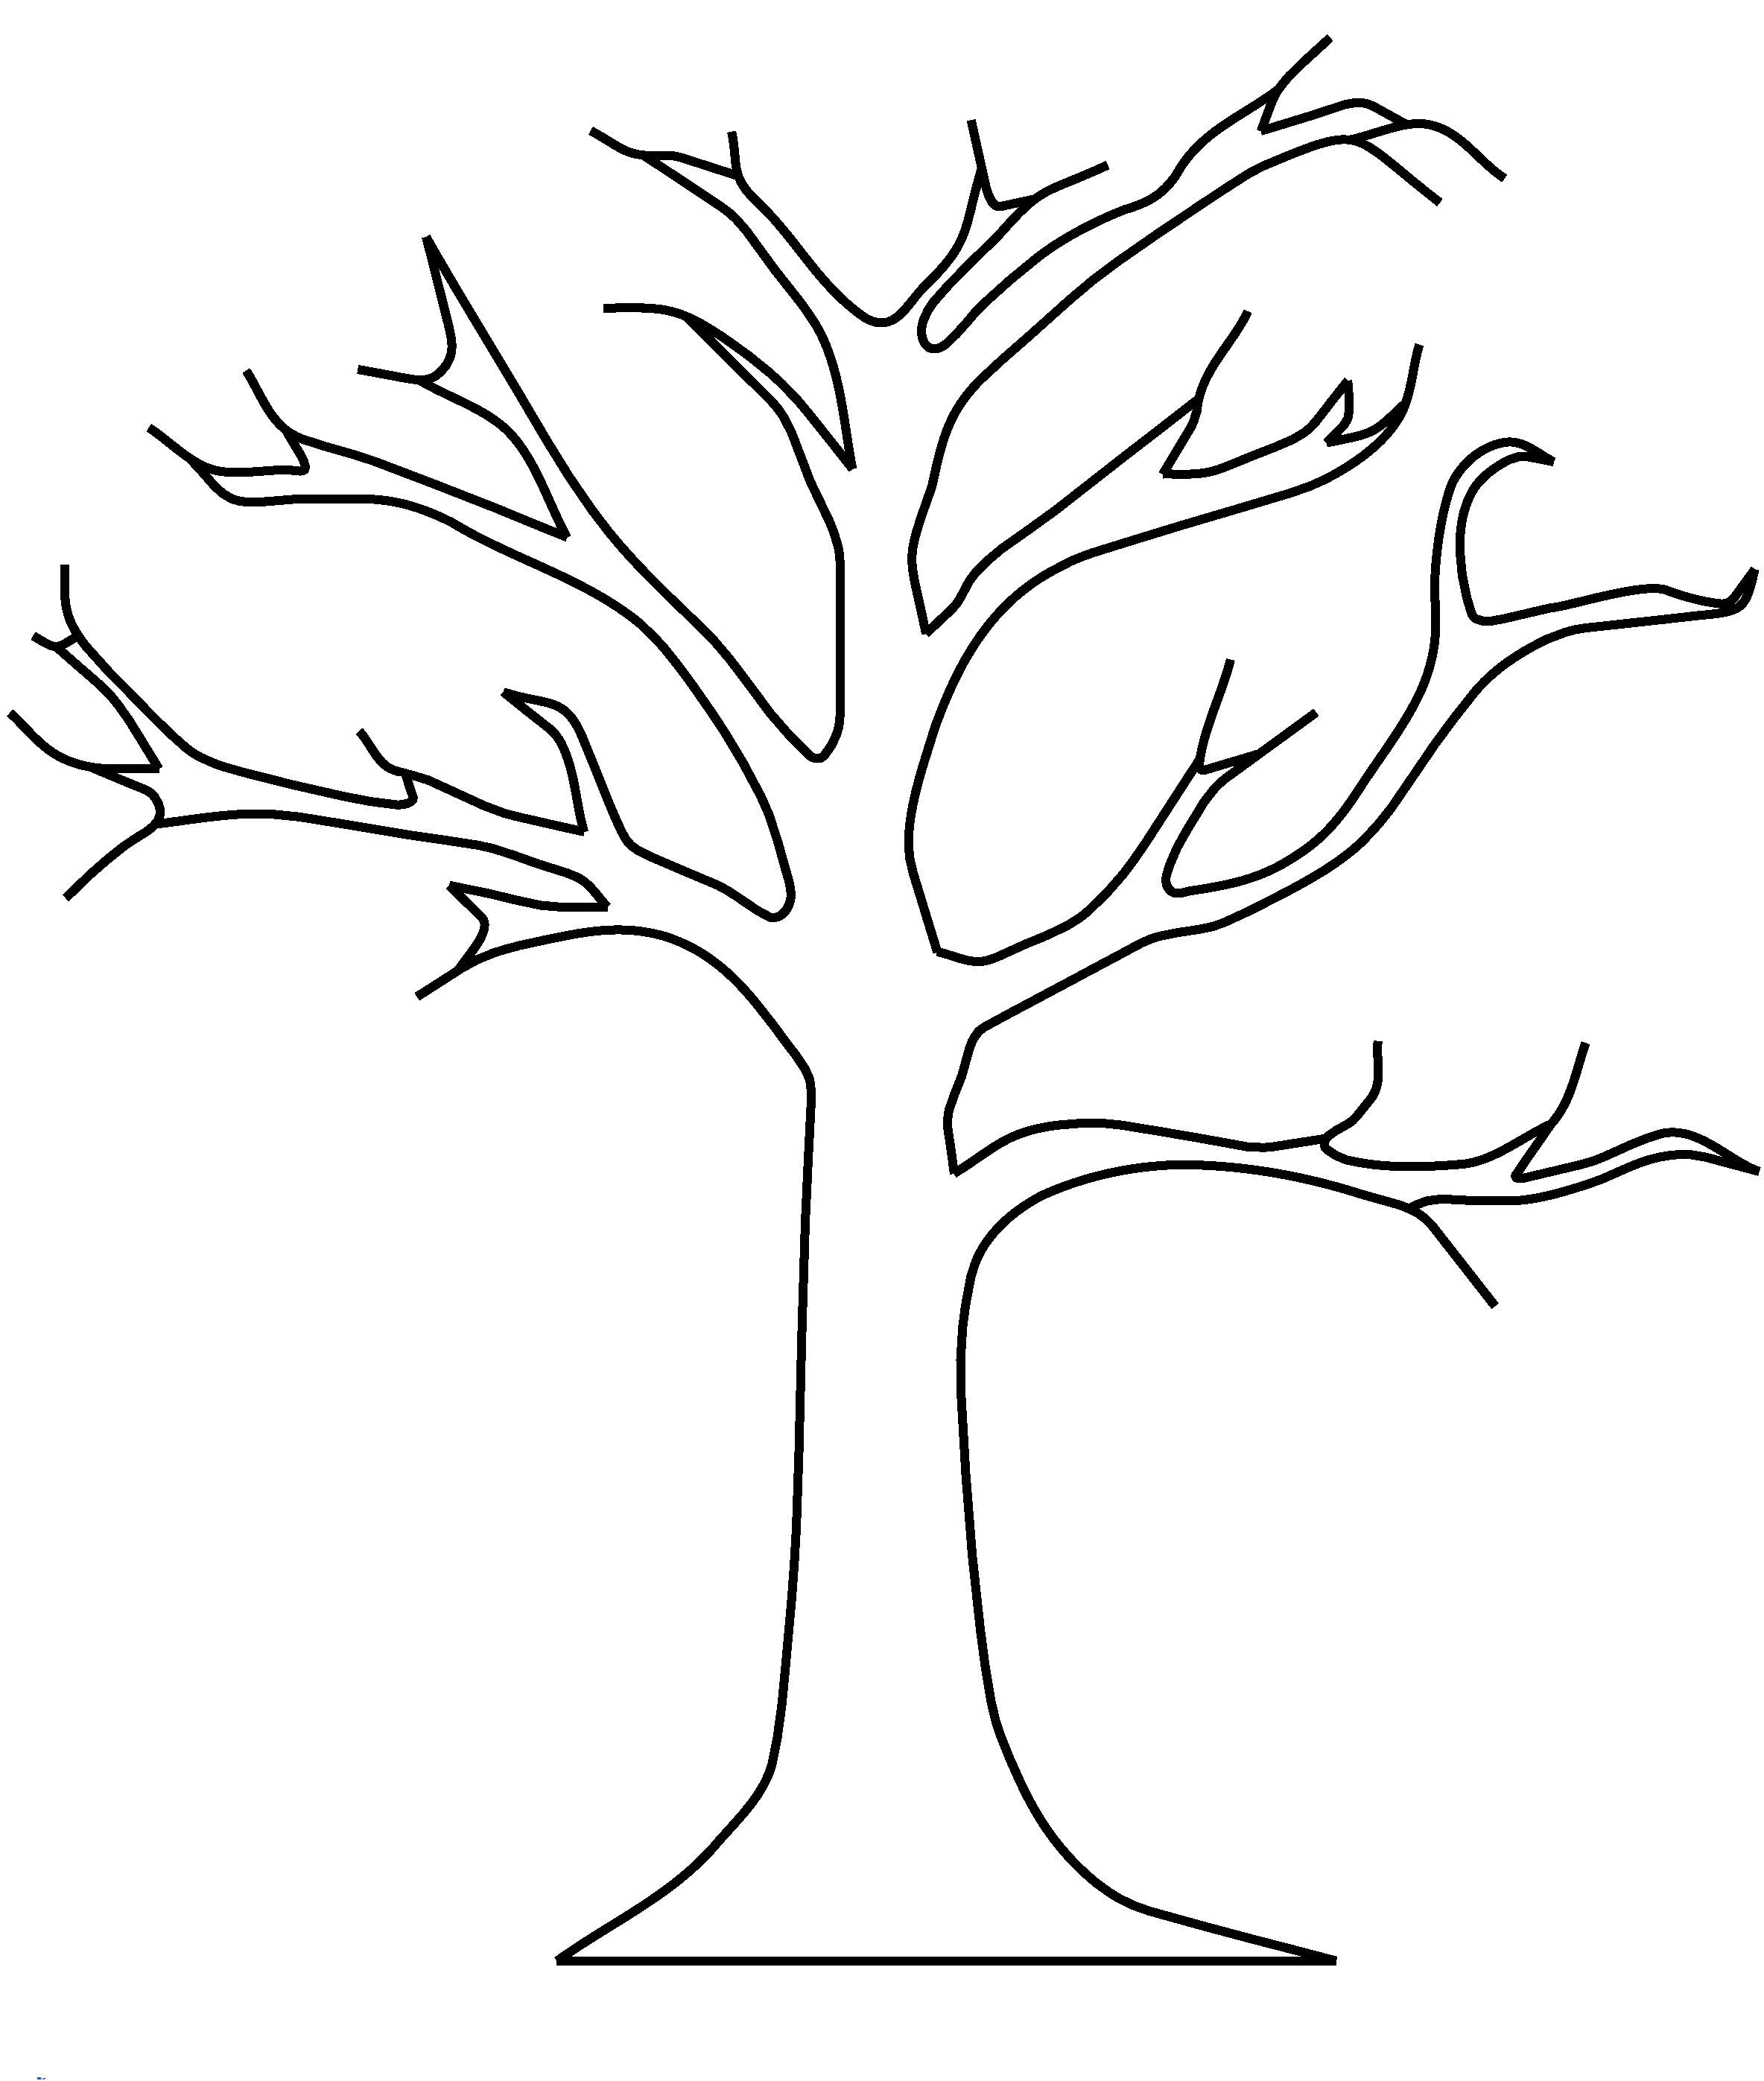 Tree Template | Best Template Collection